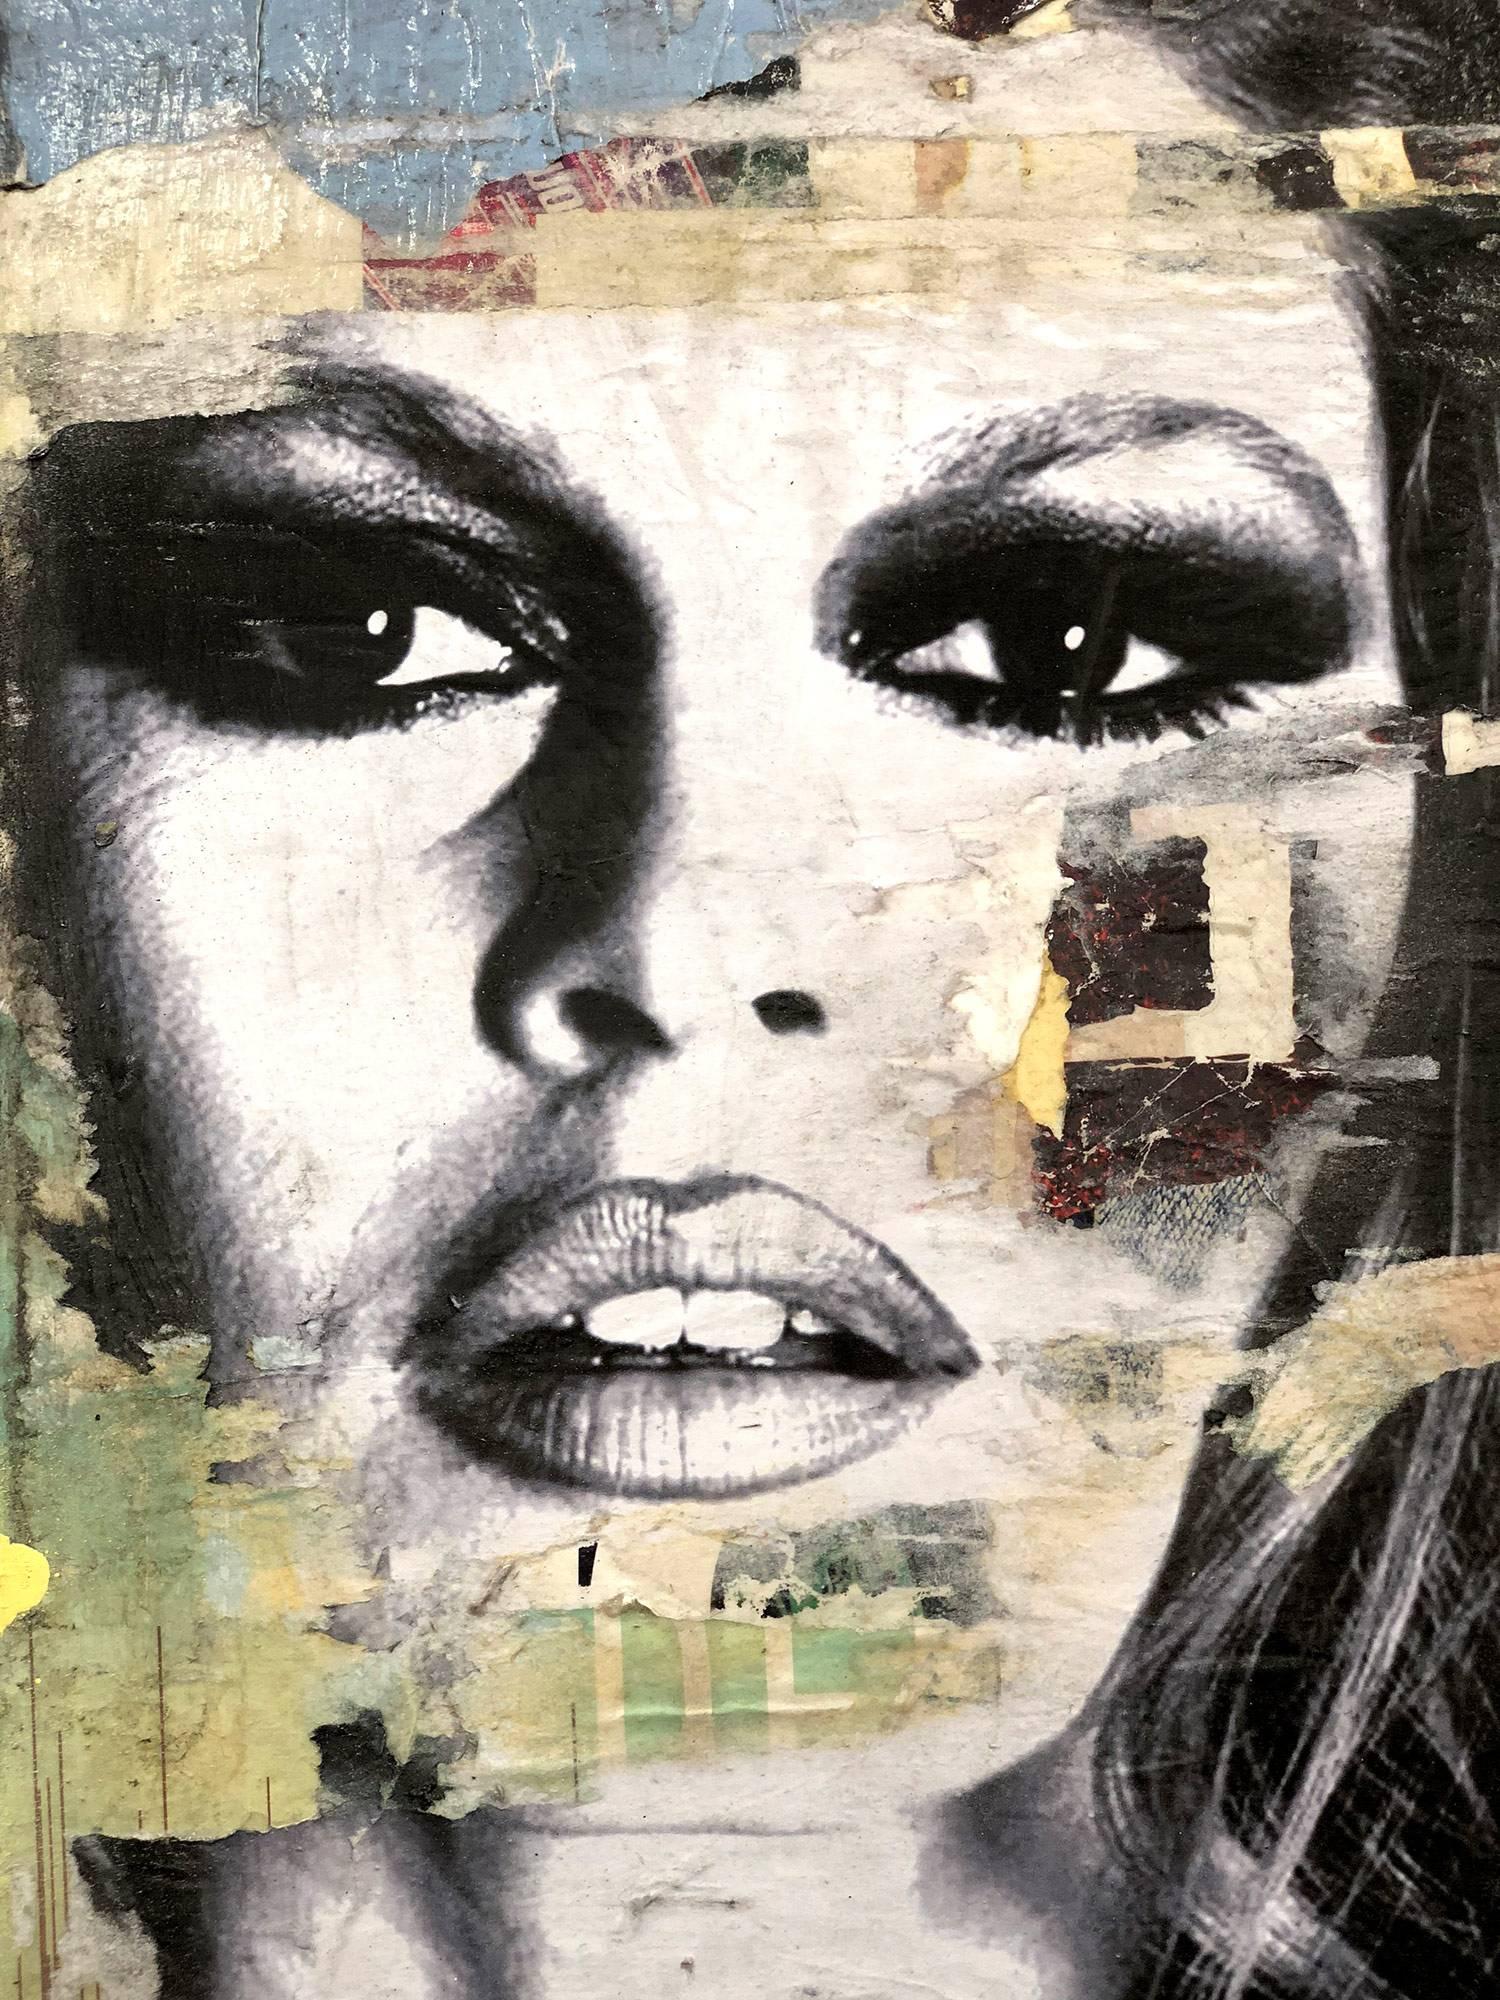 This piece depicts famous French actress and model Brigitte Bardot in a trio composition. Done with beautiful expressive colors and a distinctive street art design, this piece pops with energy and a romantic beauty. It is a large canvas that makes a